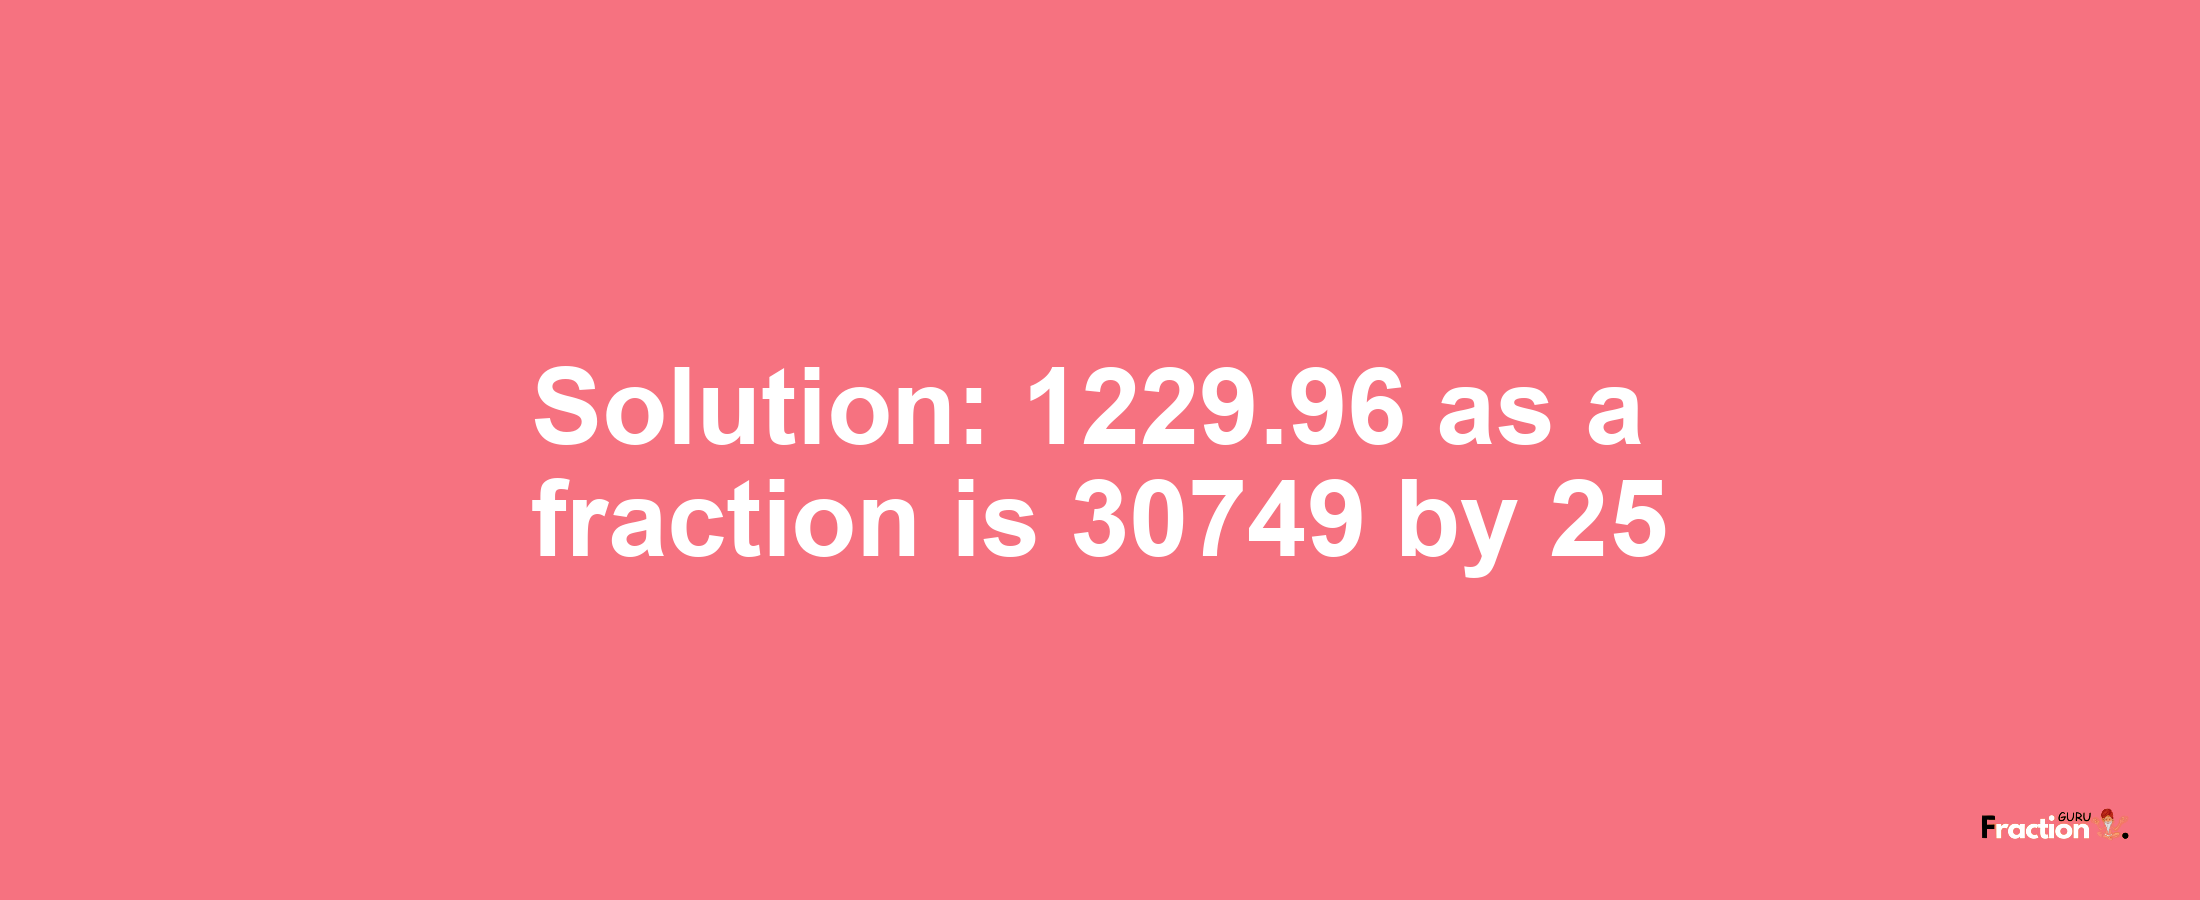 Solution:1229.96 as a fraction is 30749/25